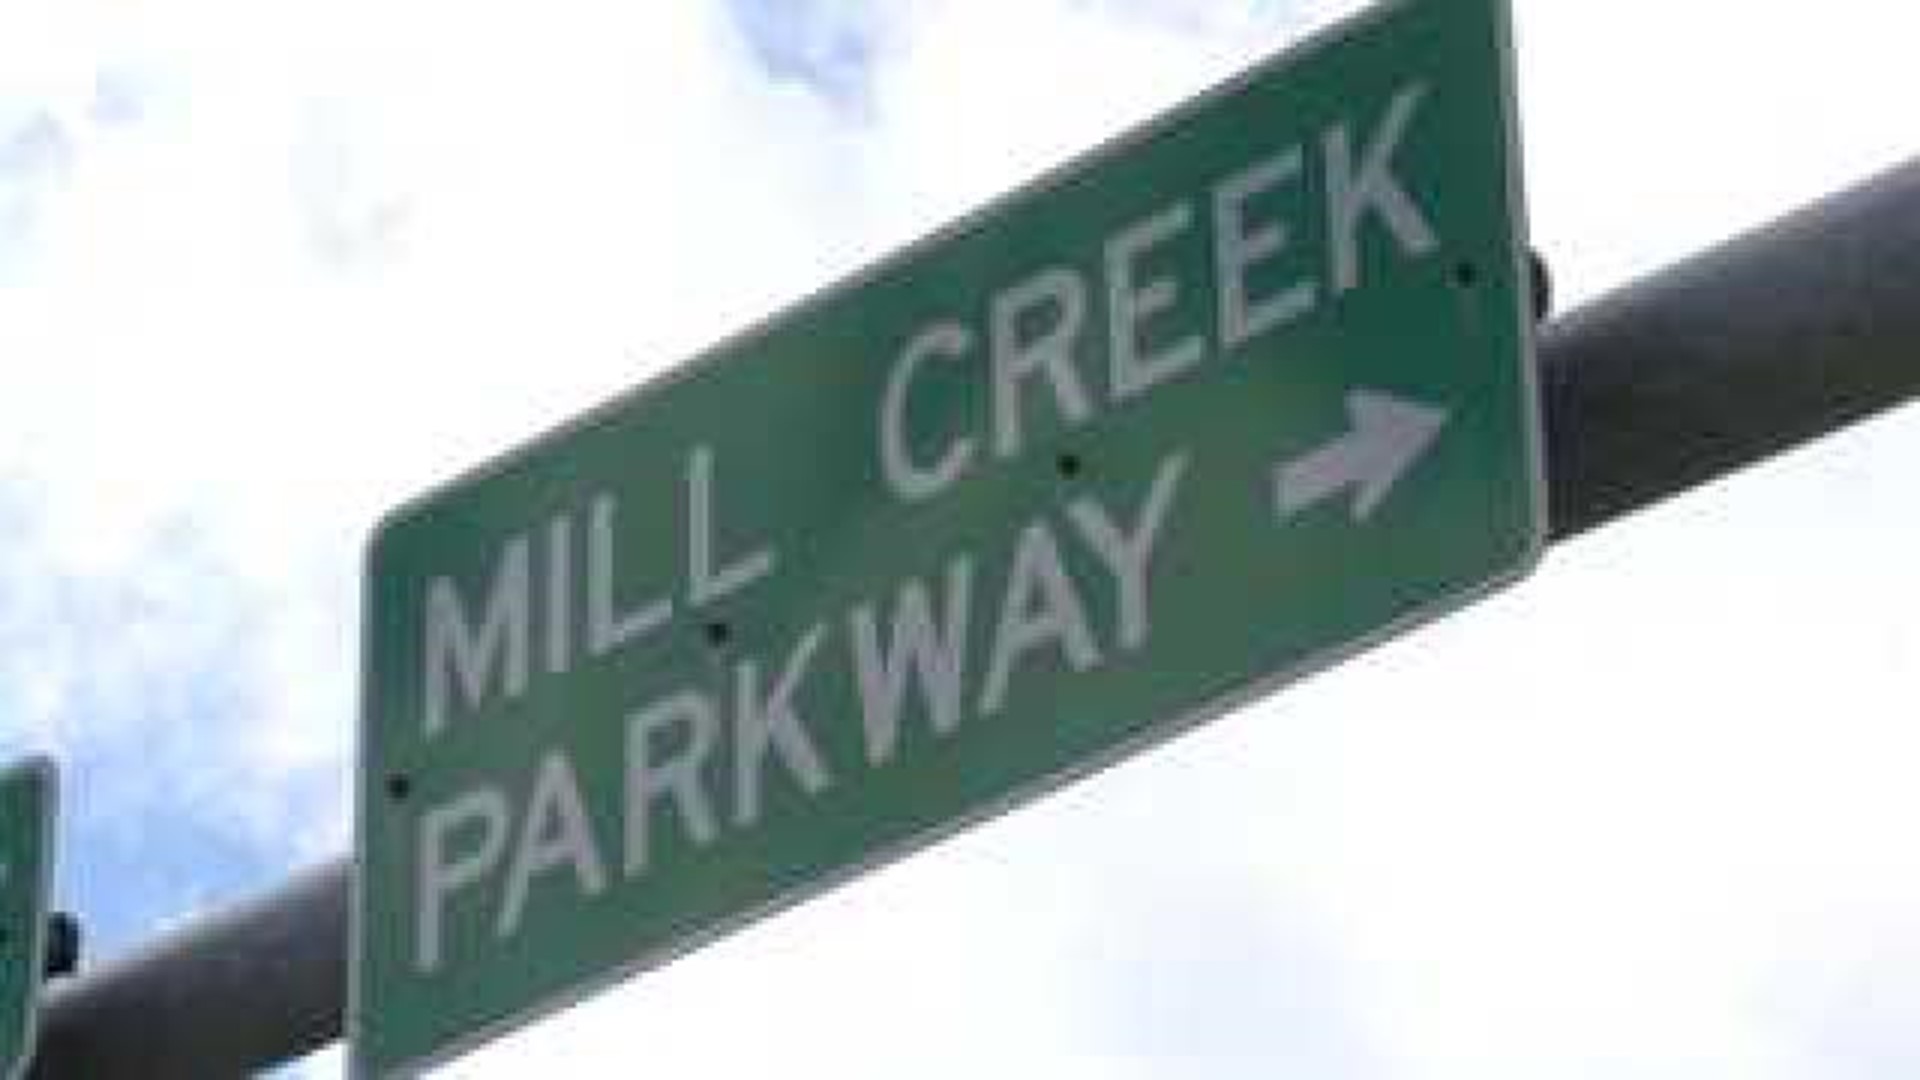 Clinton\'s Mill Creek Parkway aims to be new business destination